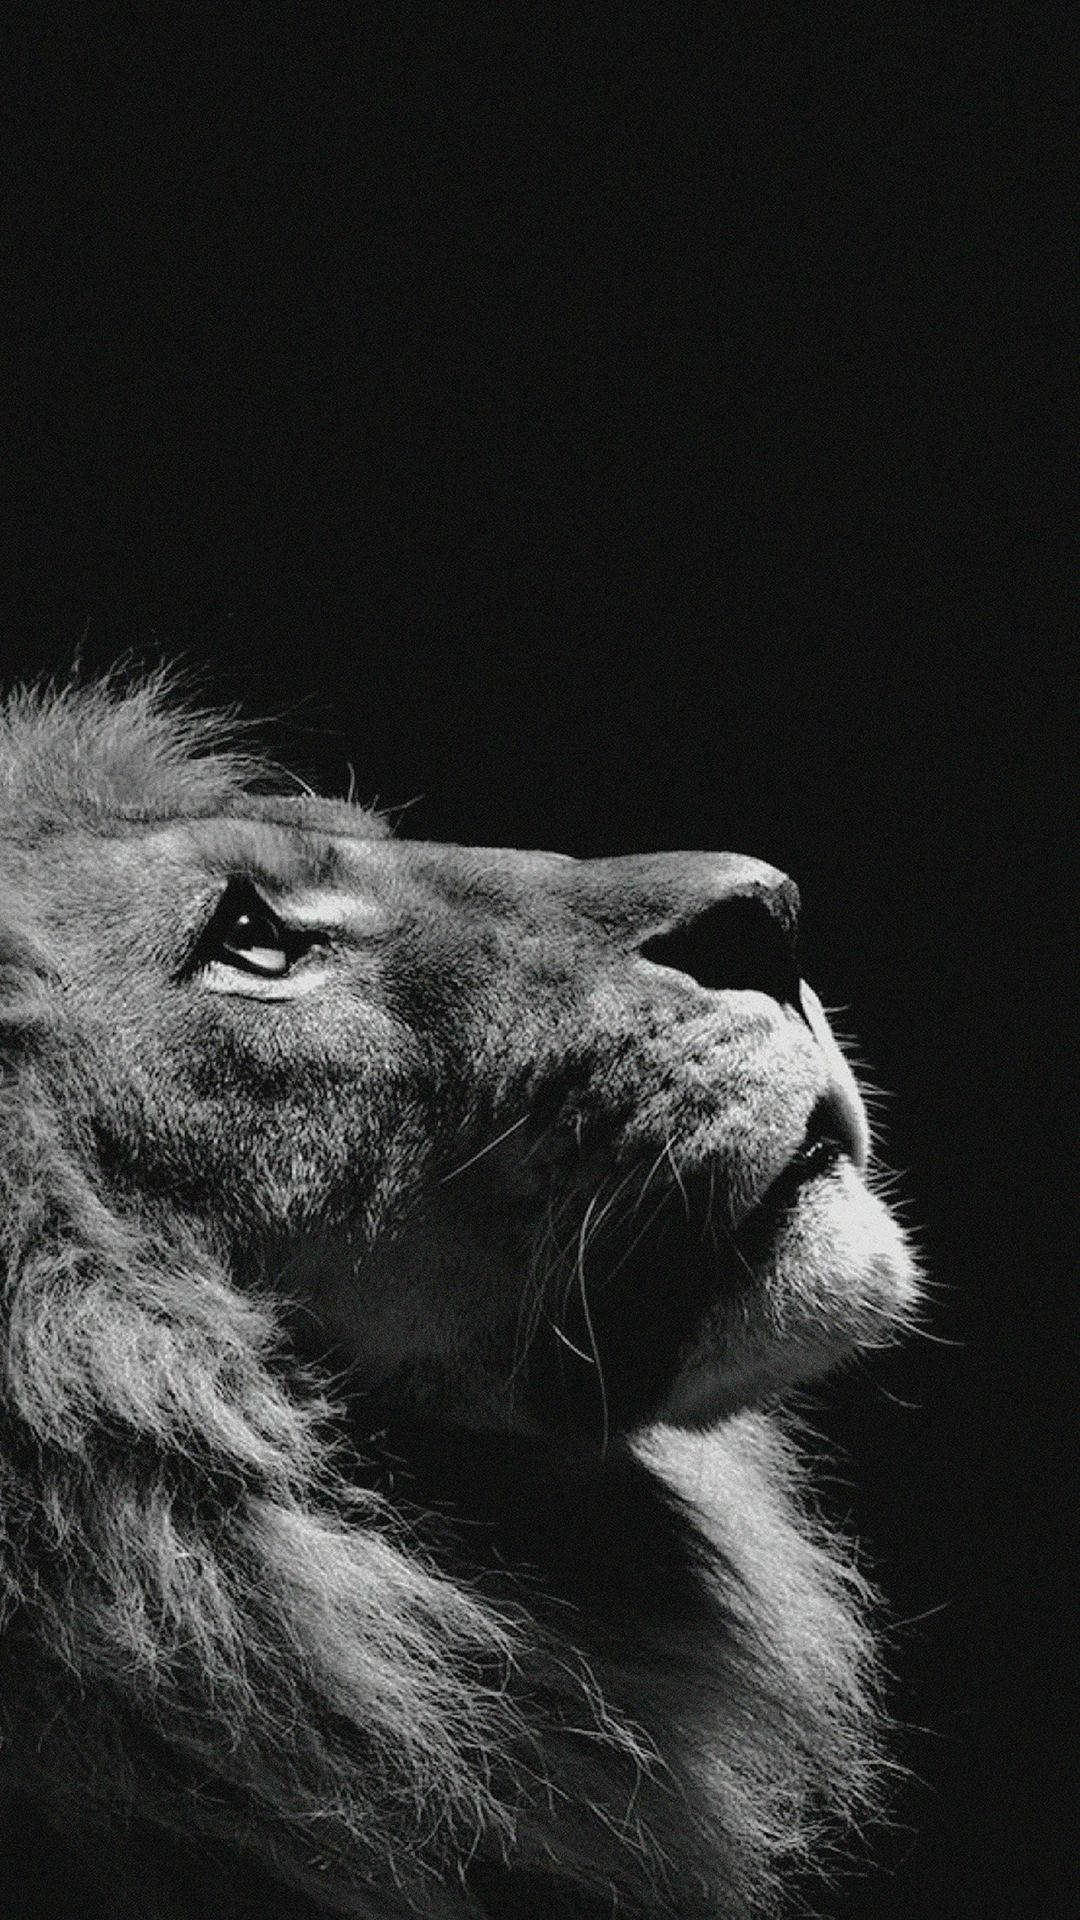 Download Animal Lion Black And White Portrait Iphone Wallpaper | Wallpapers .com